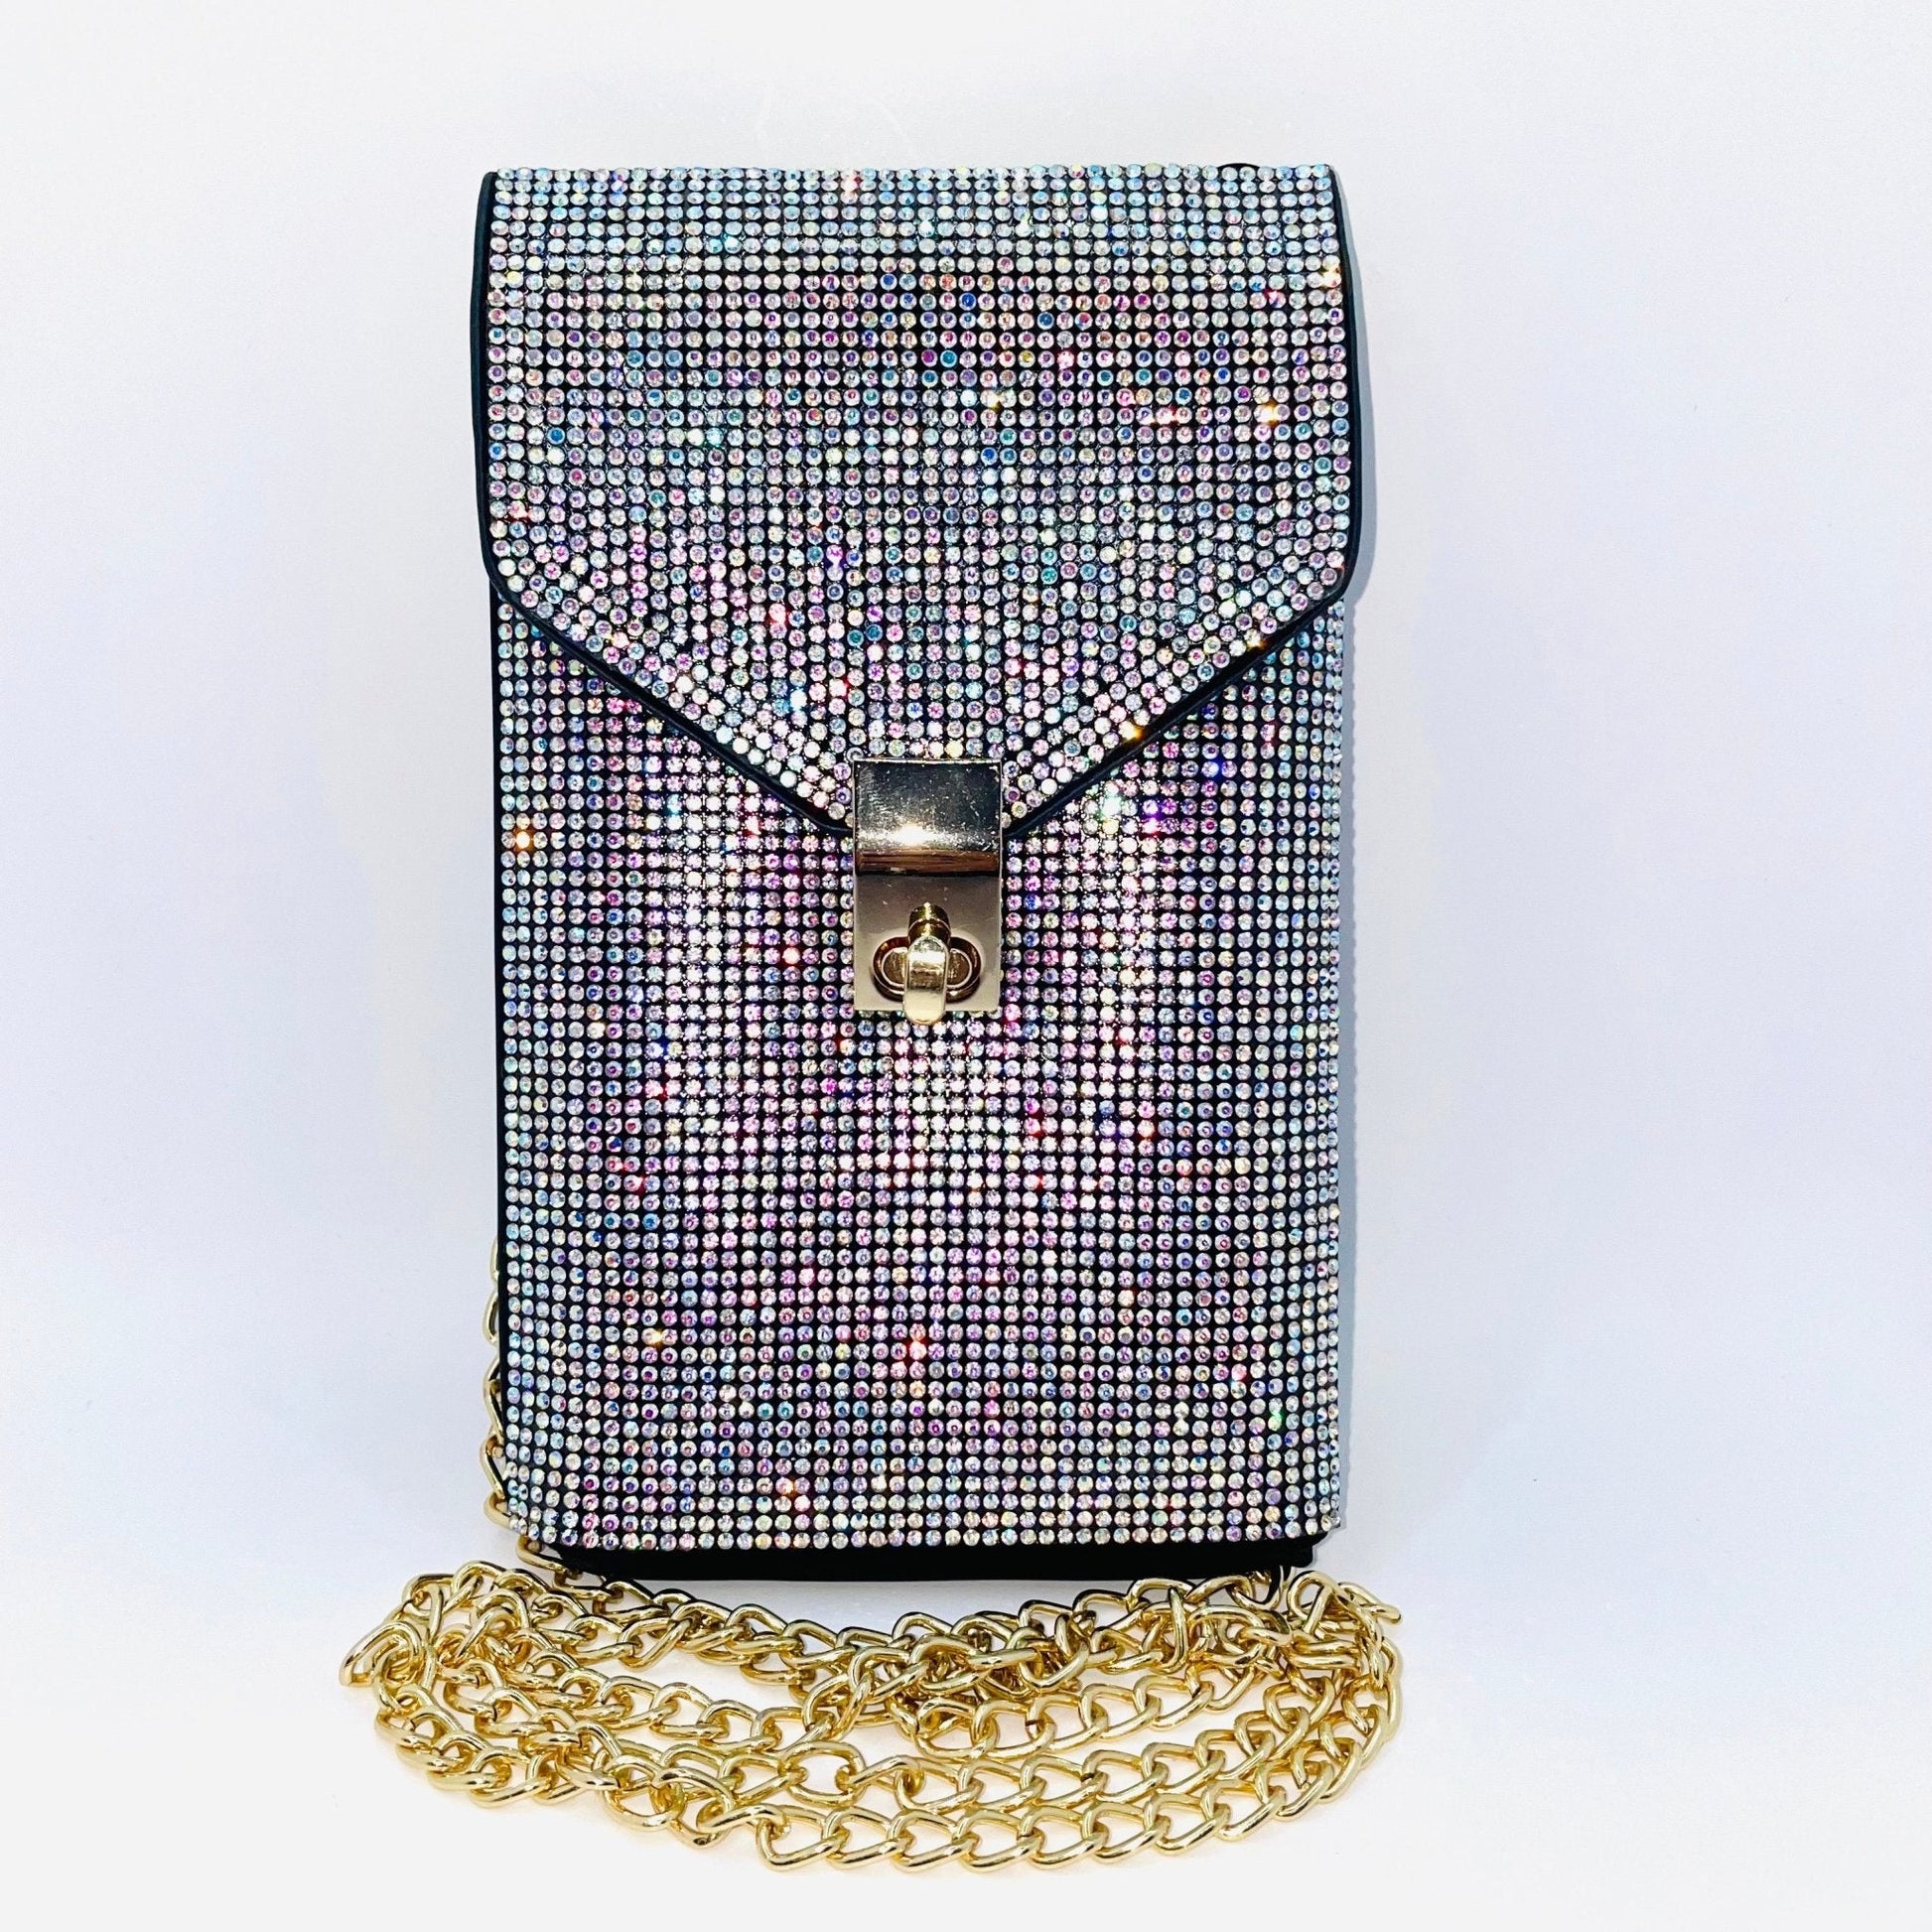 Some Bling Bags - House of FaSHUN by Shun Melson